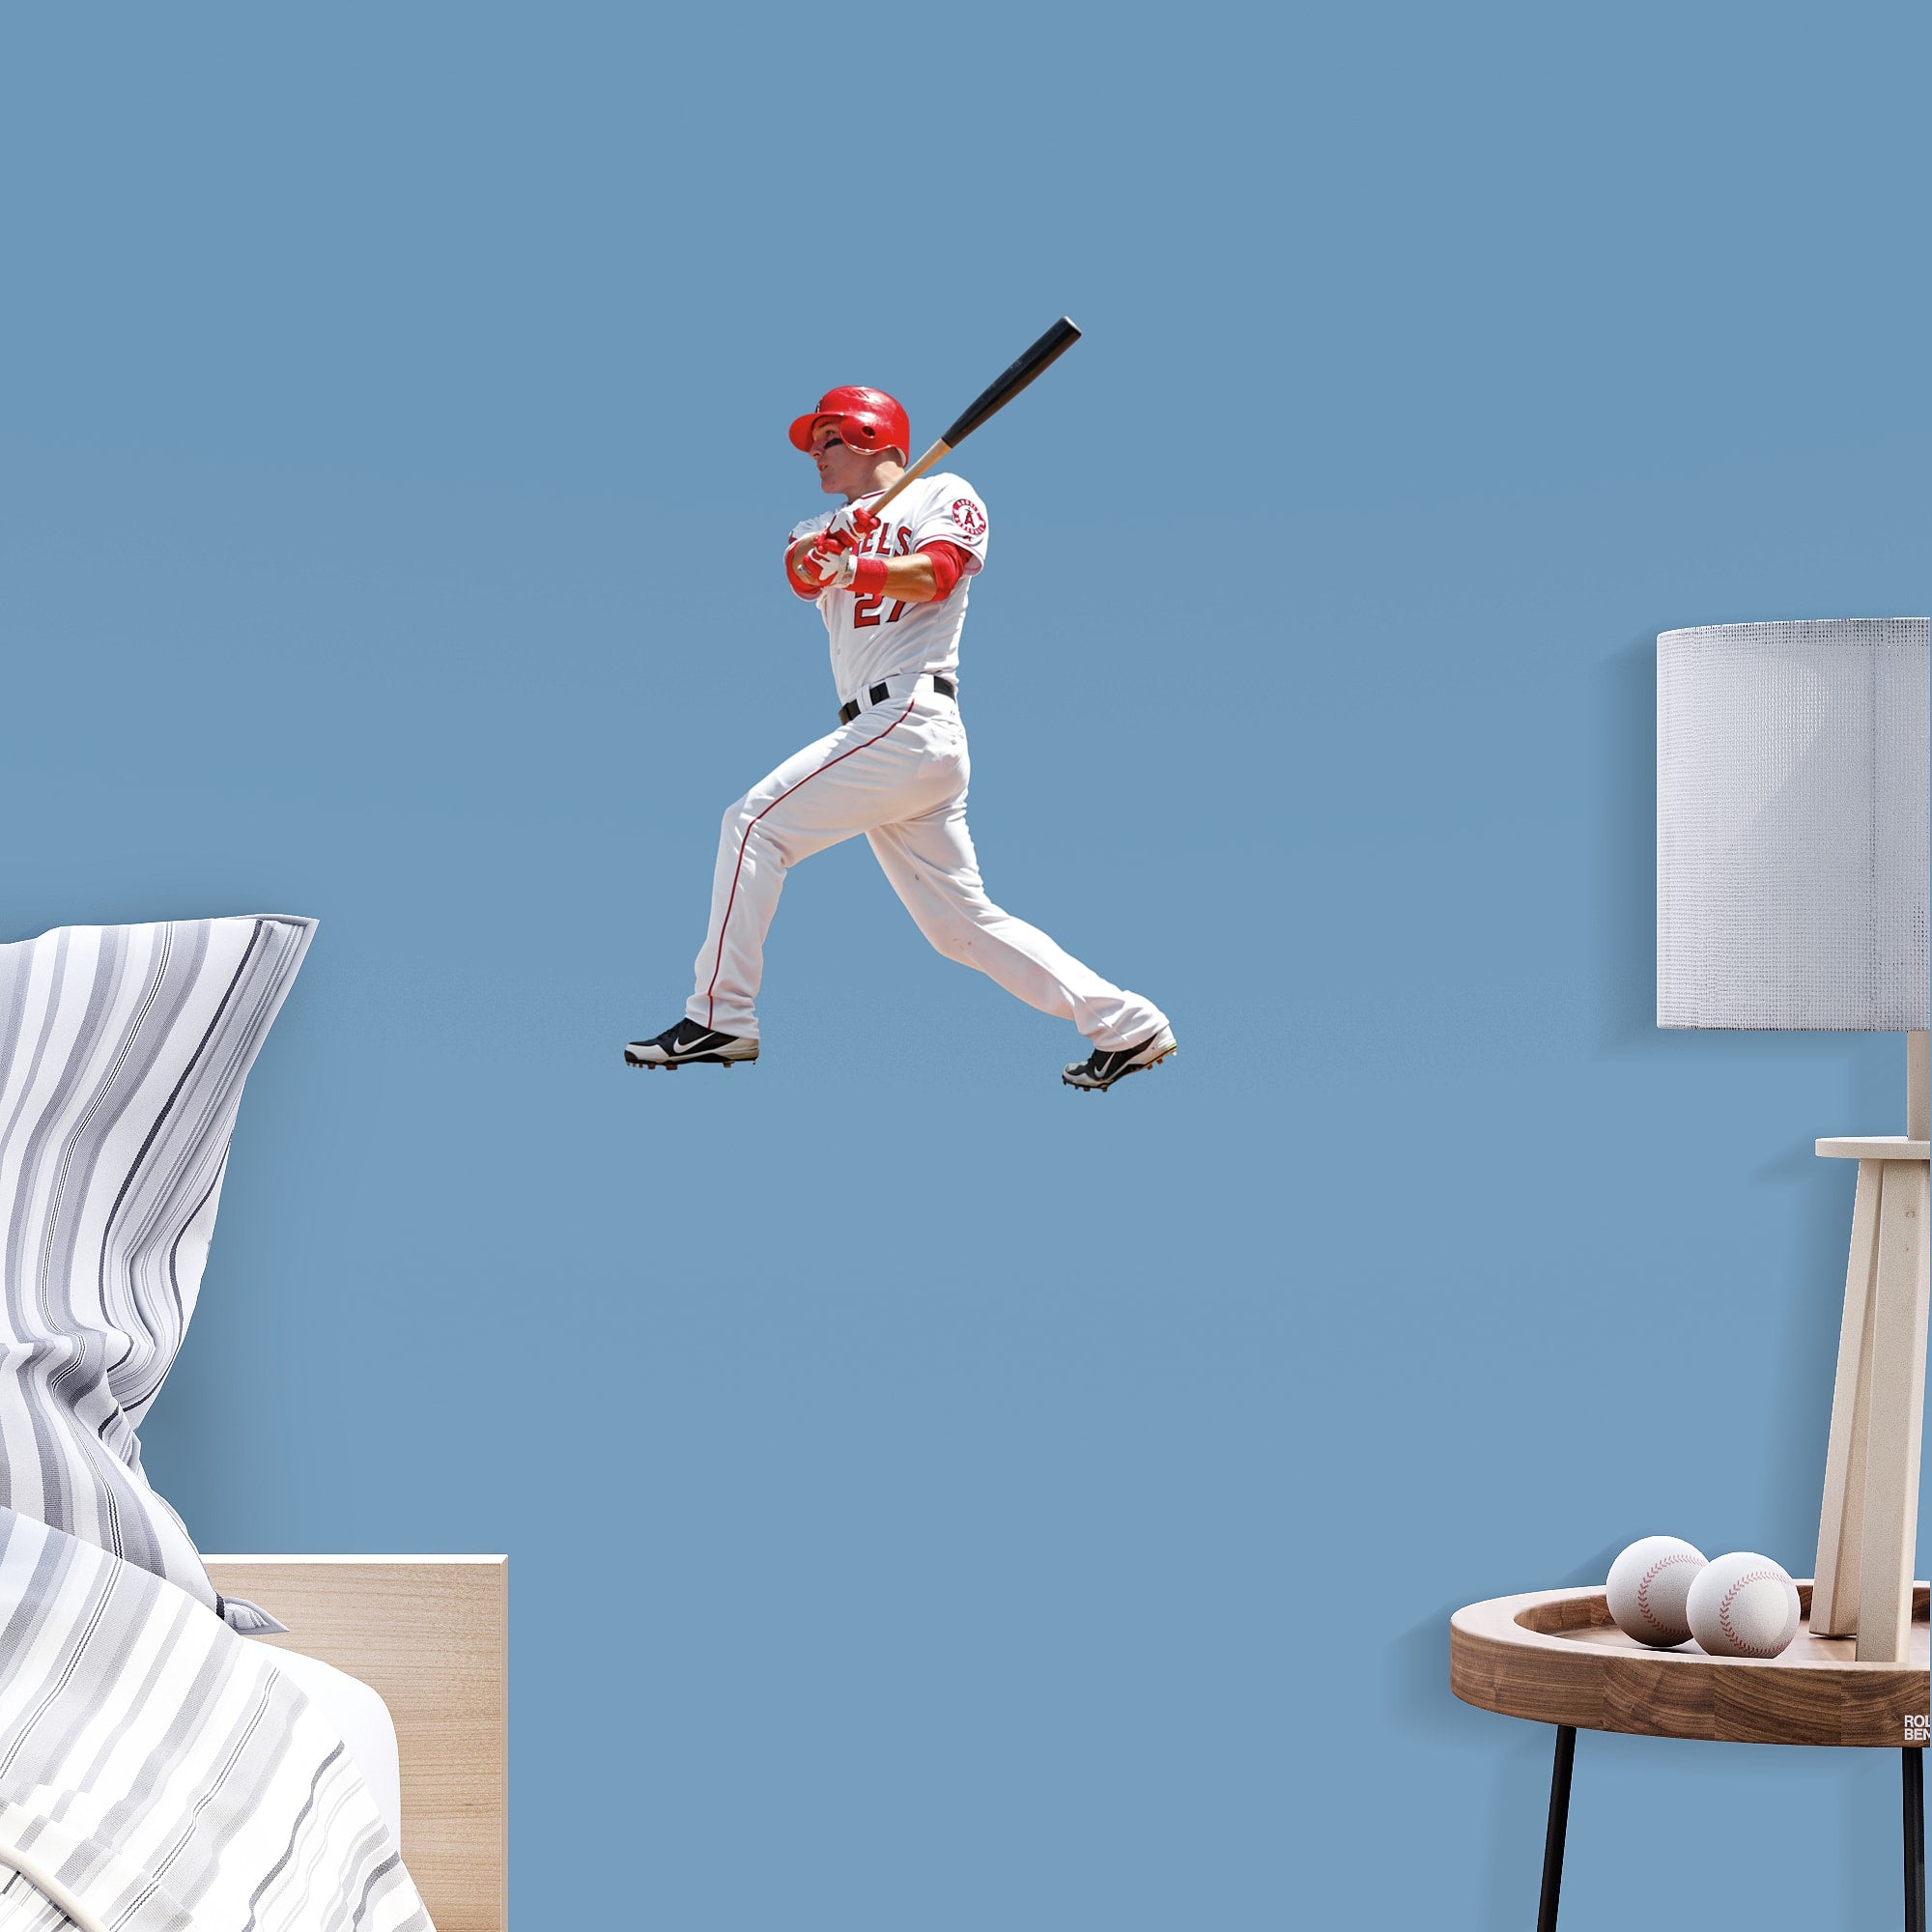 Mike Trout for LA Angels: Home - Officially Licensed MLB Removable Wall Decal 12.0"W x 17.0"H by Fathead | Vinyl